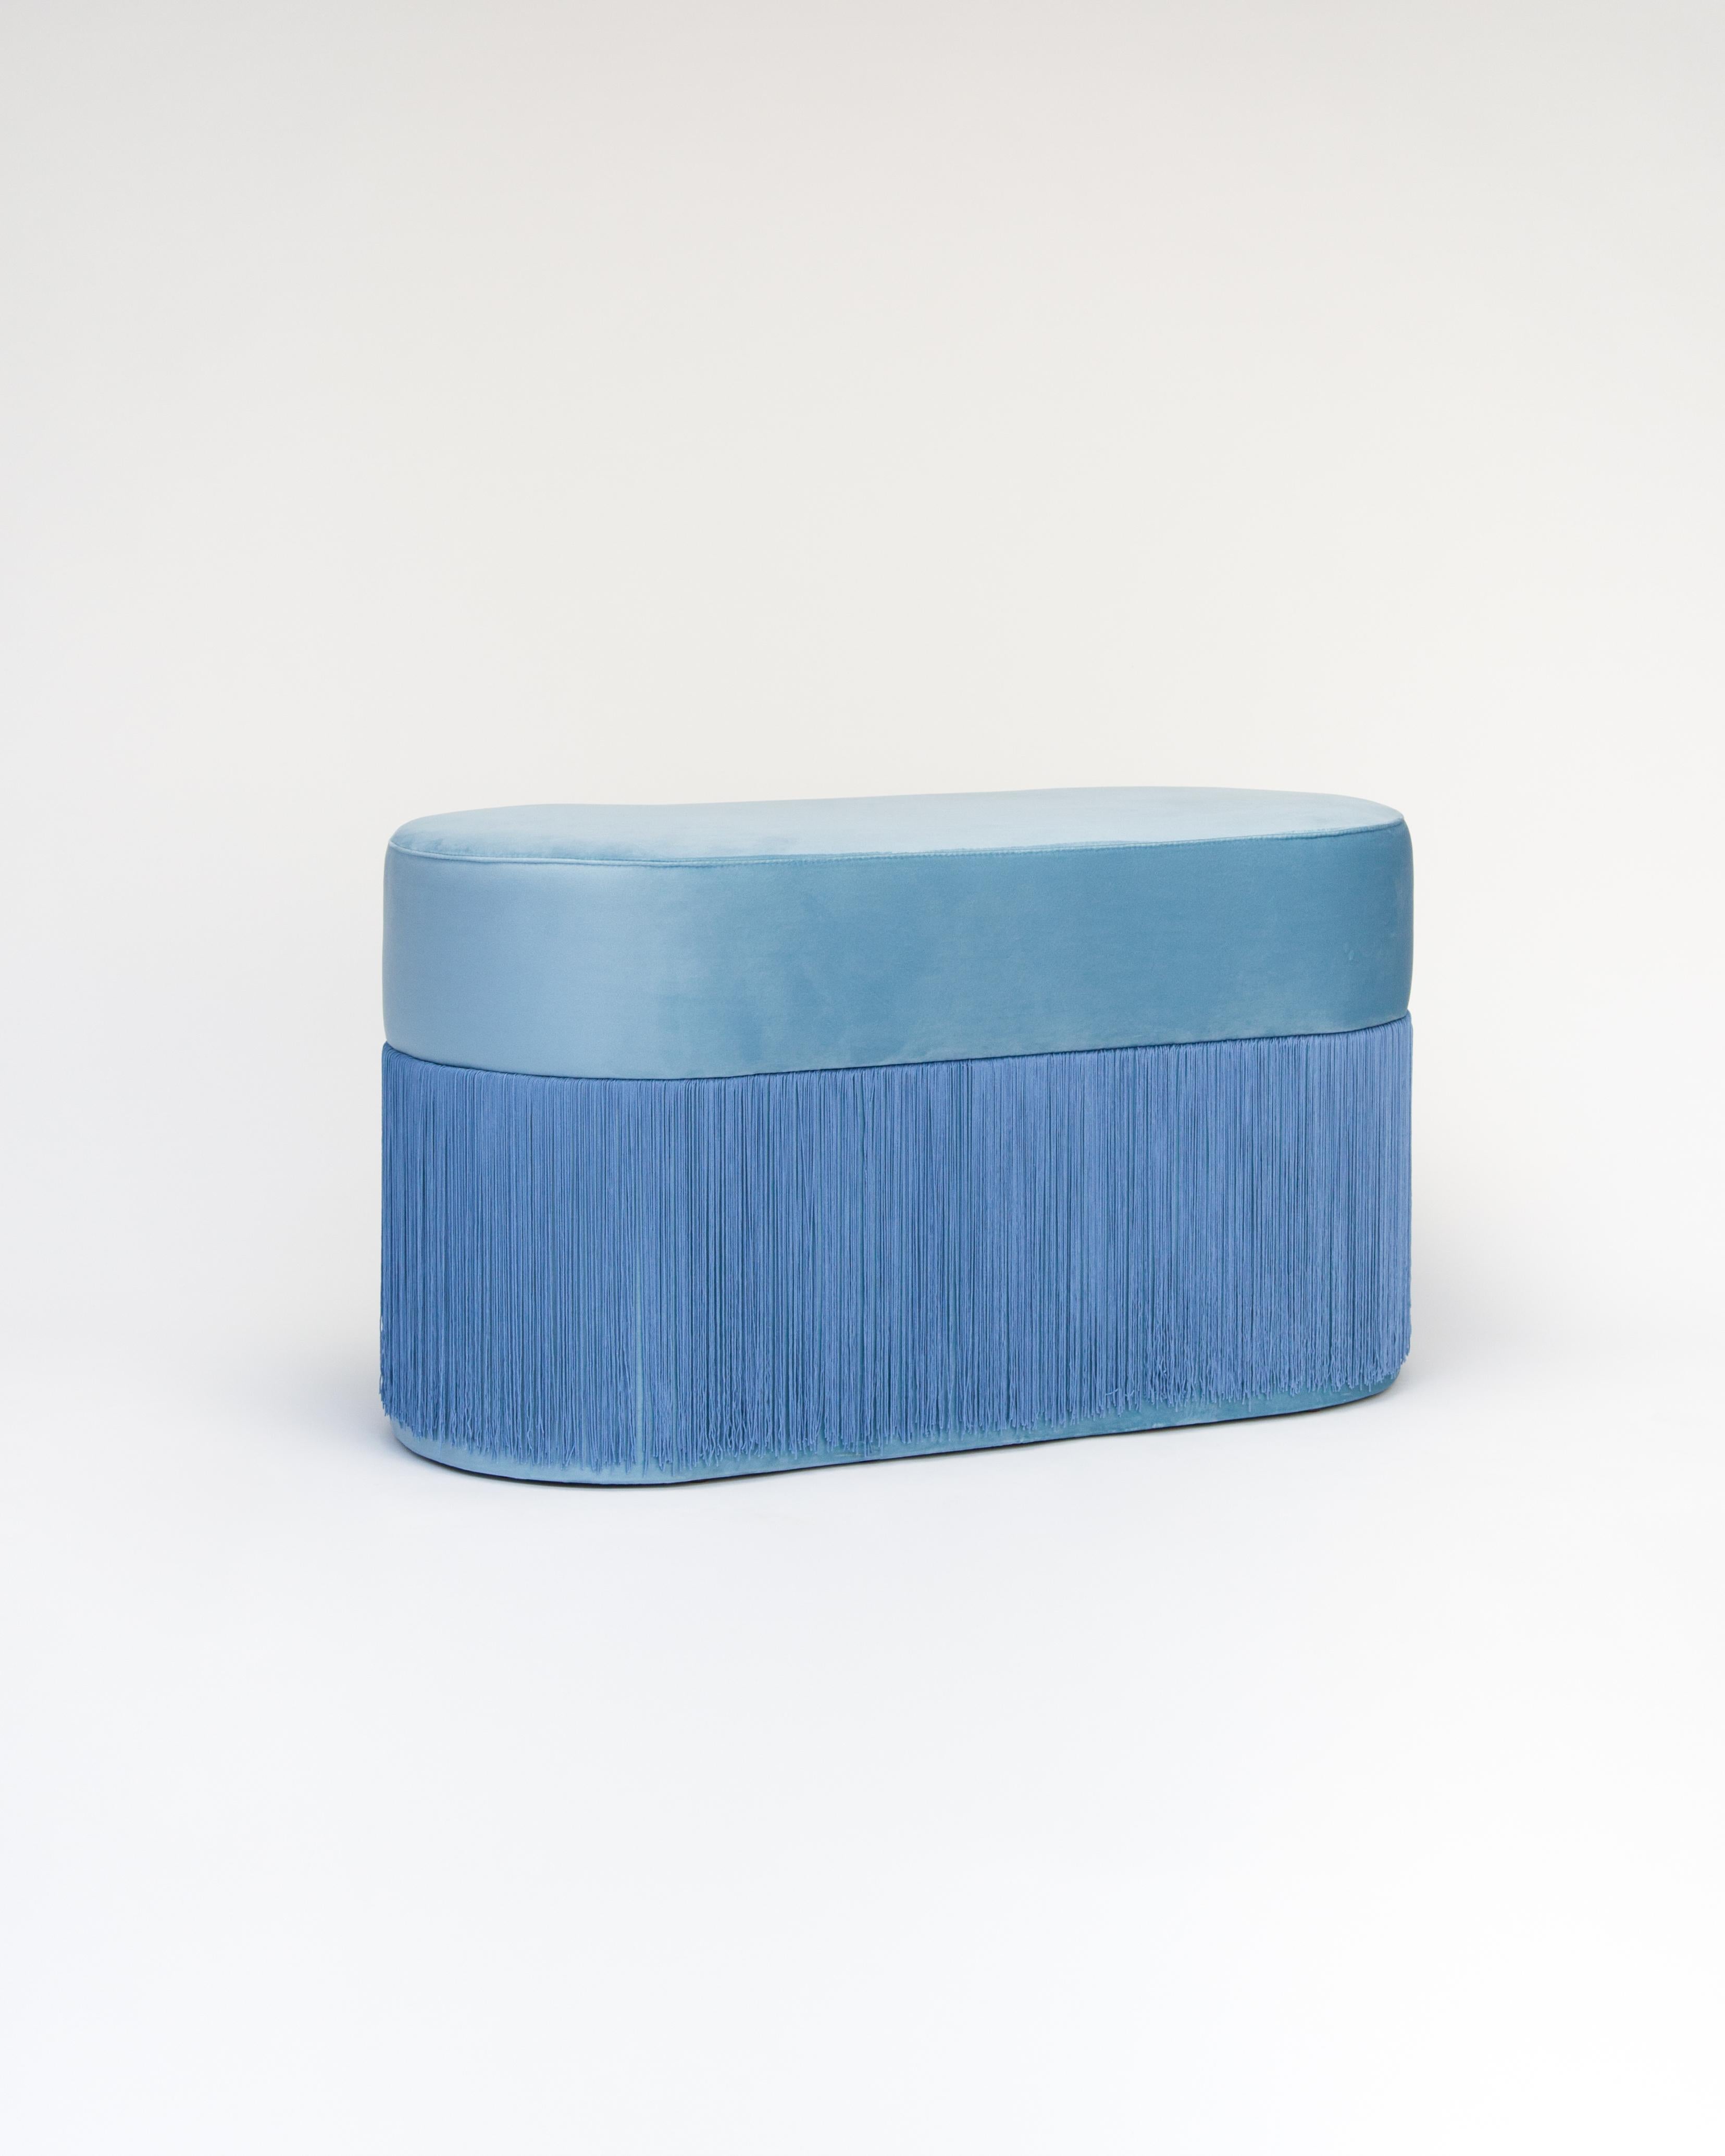 Pouf pill L by Houtique
Dimensions: H 45 x 80 x 35 cm
Materials: Velvet upholstery and 30cm fringes

Pill Pouf L
Art-deco style pouf with wood structure and velvet fabric.
2 fiber-board discs of 16mm, joined by wooden tufts.
Upholstery Velvet 100%